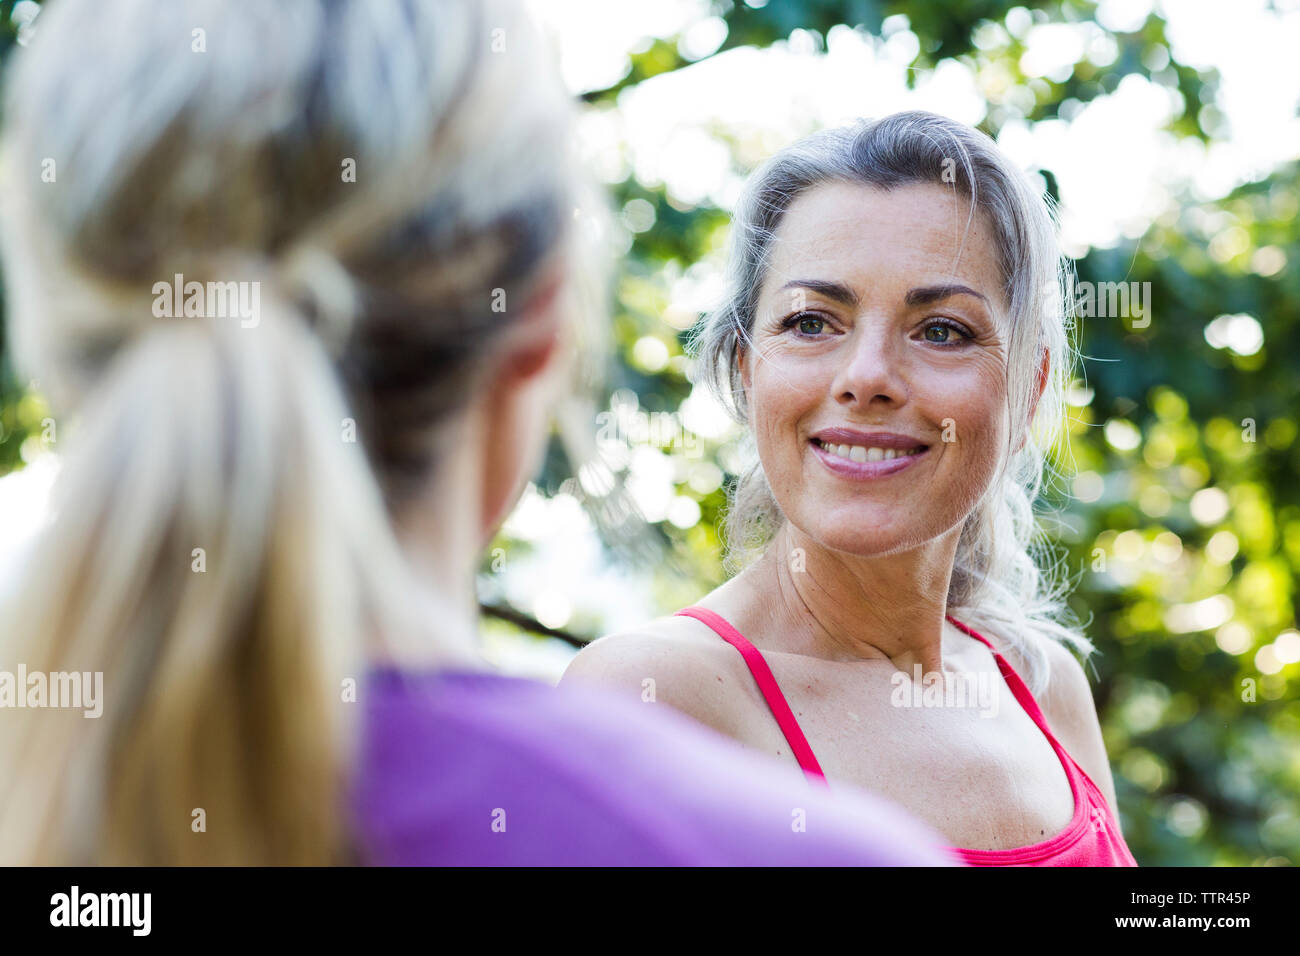 Smiling woman looking at friend in park Banque D'Images